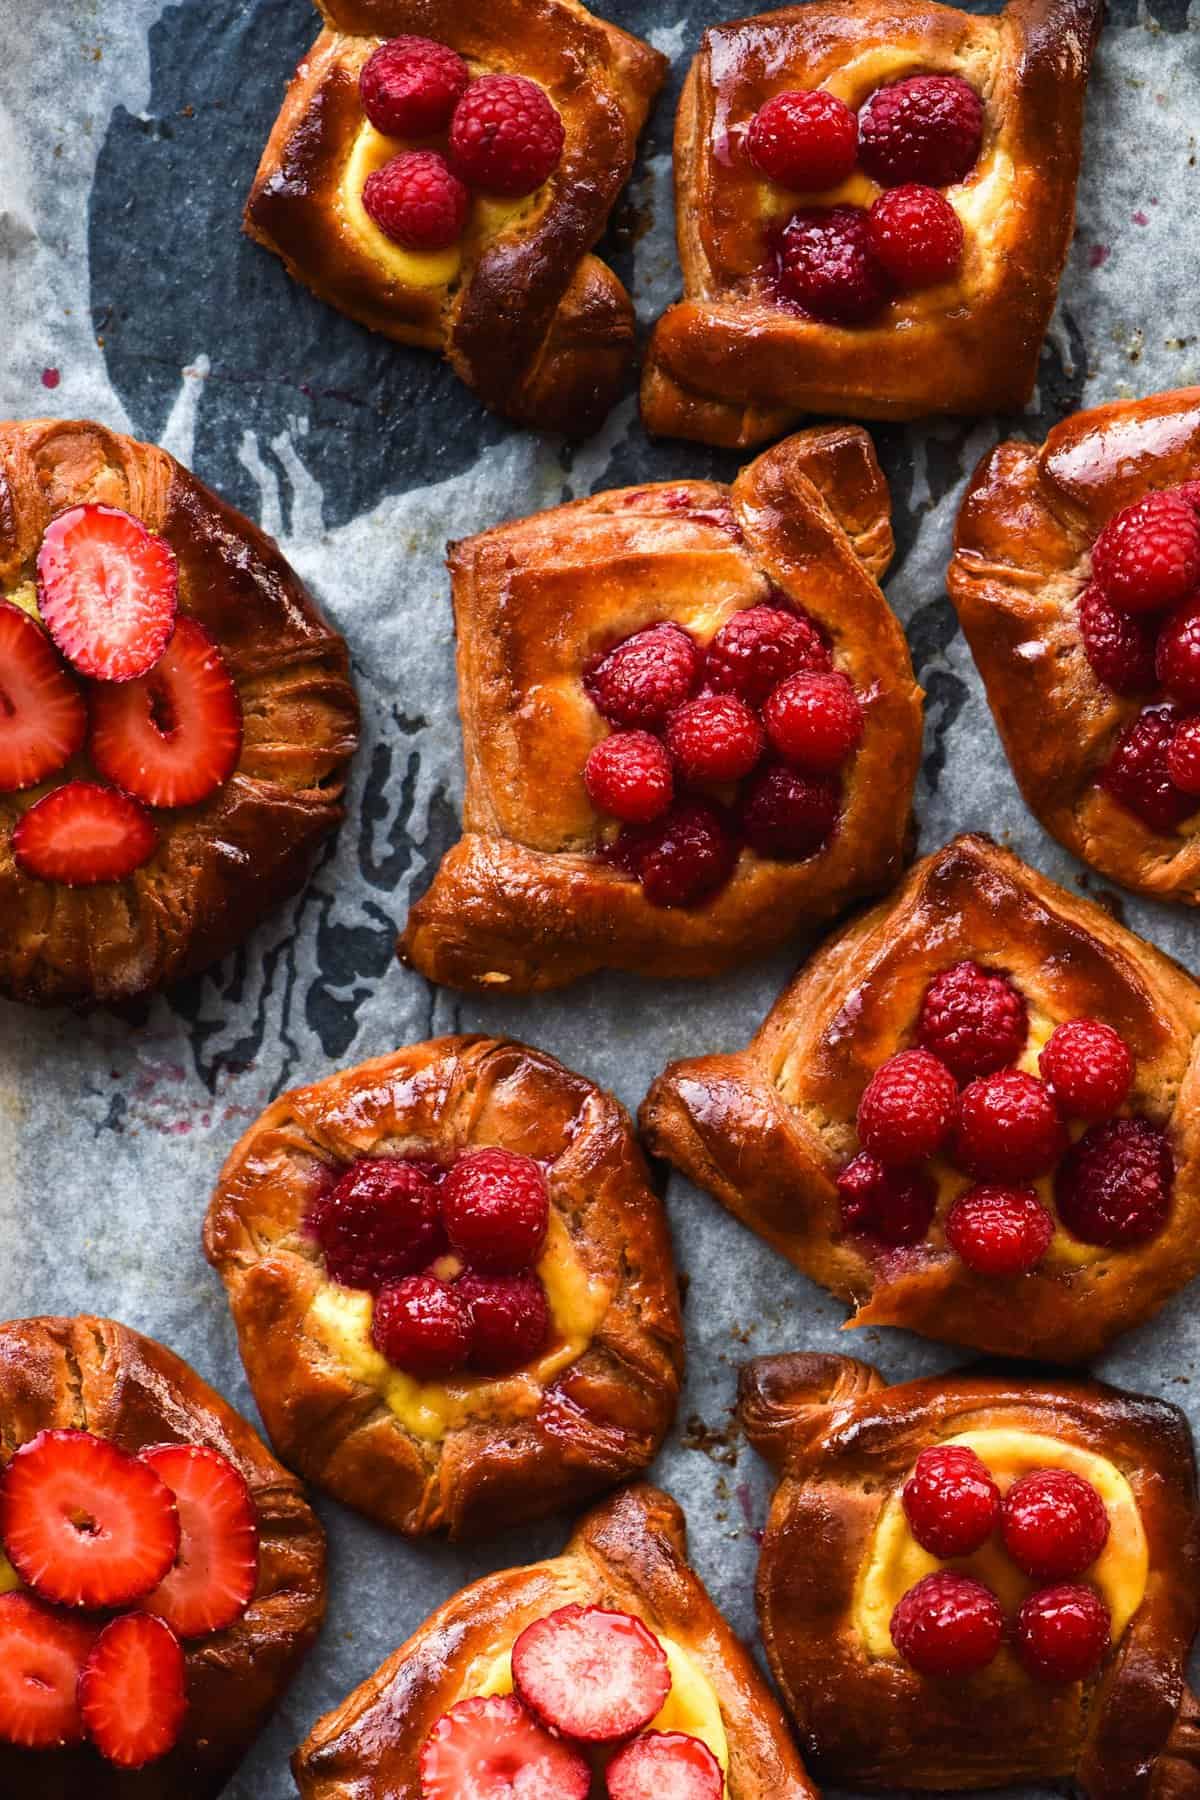 An aerial view of gluten free custard danishes topped with custard, vibrant strawberries and raspberries. The danishes sit atop a baking tray lined with baking paper